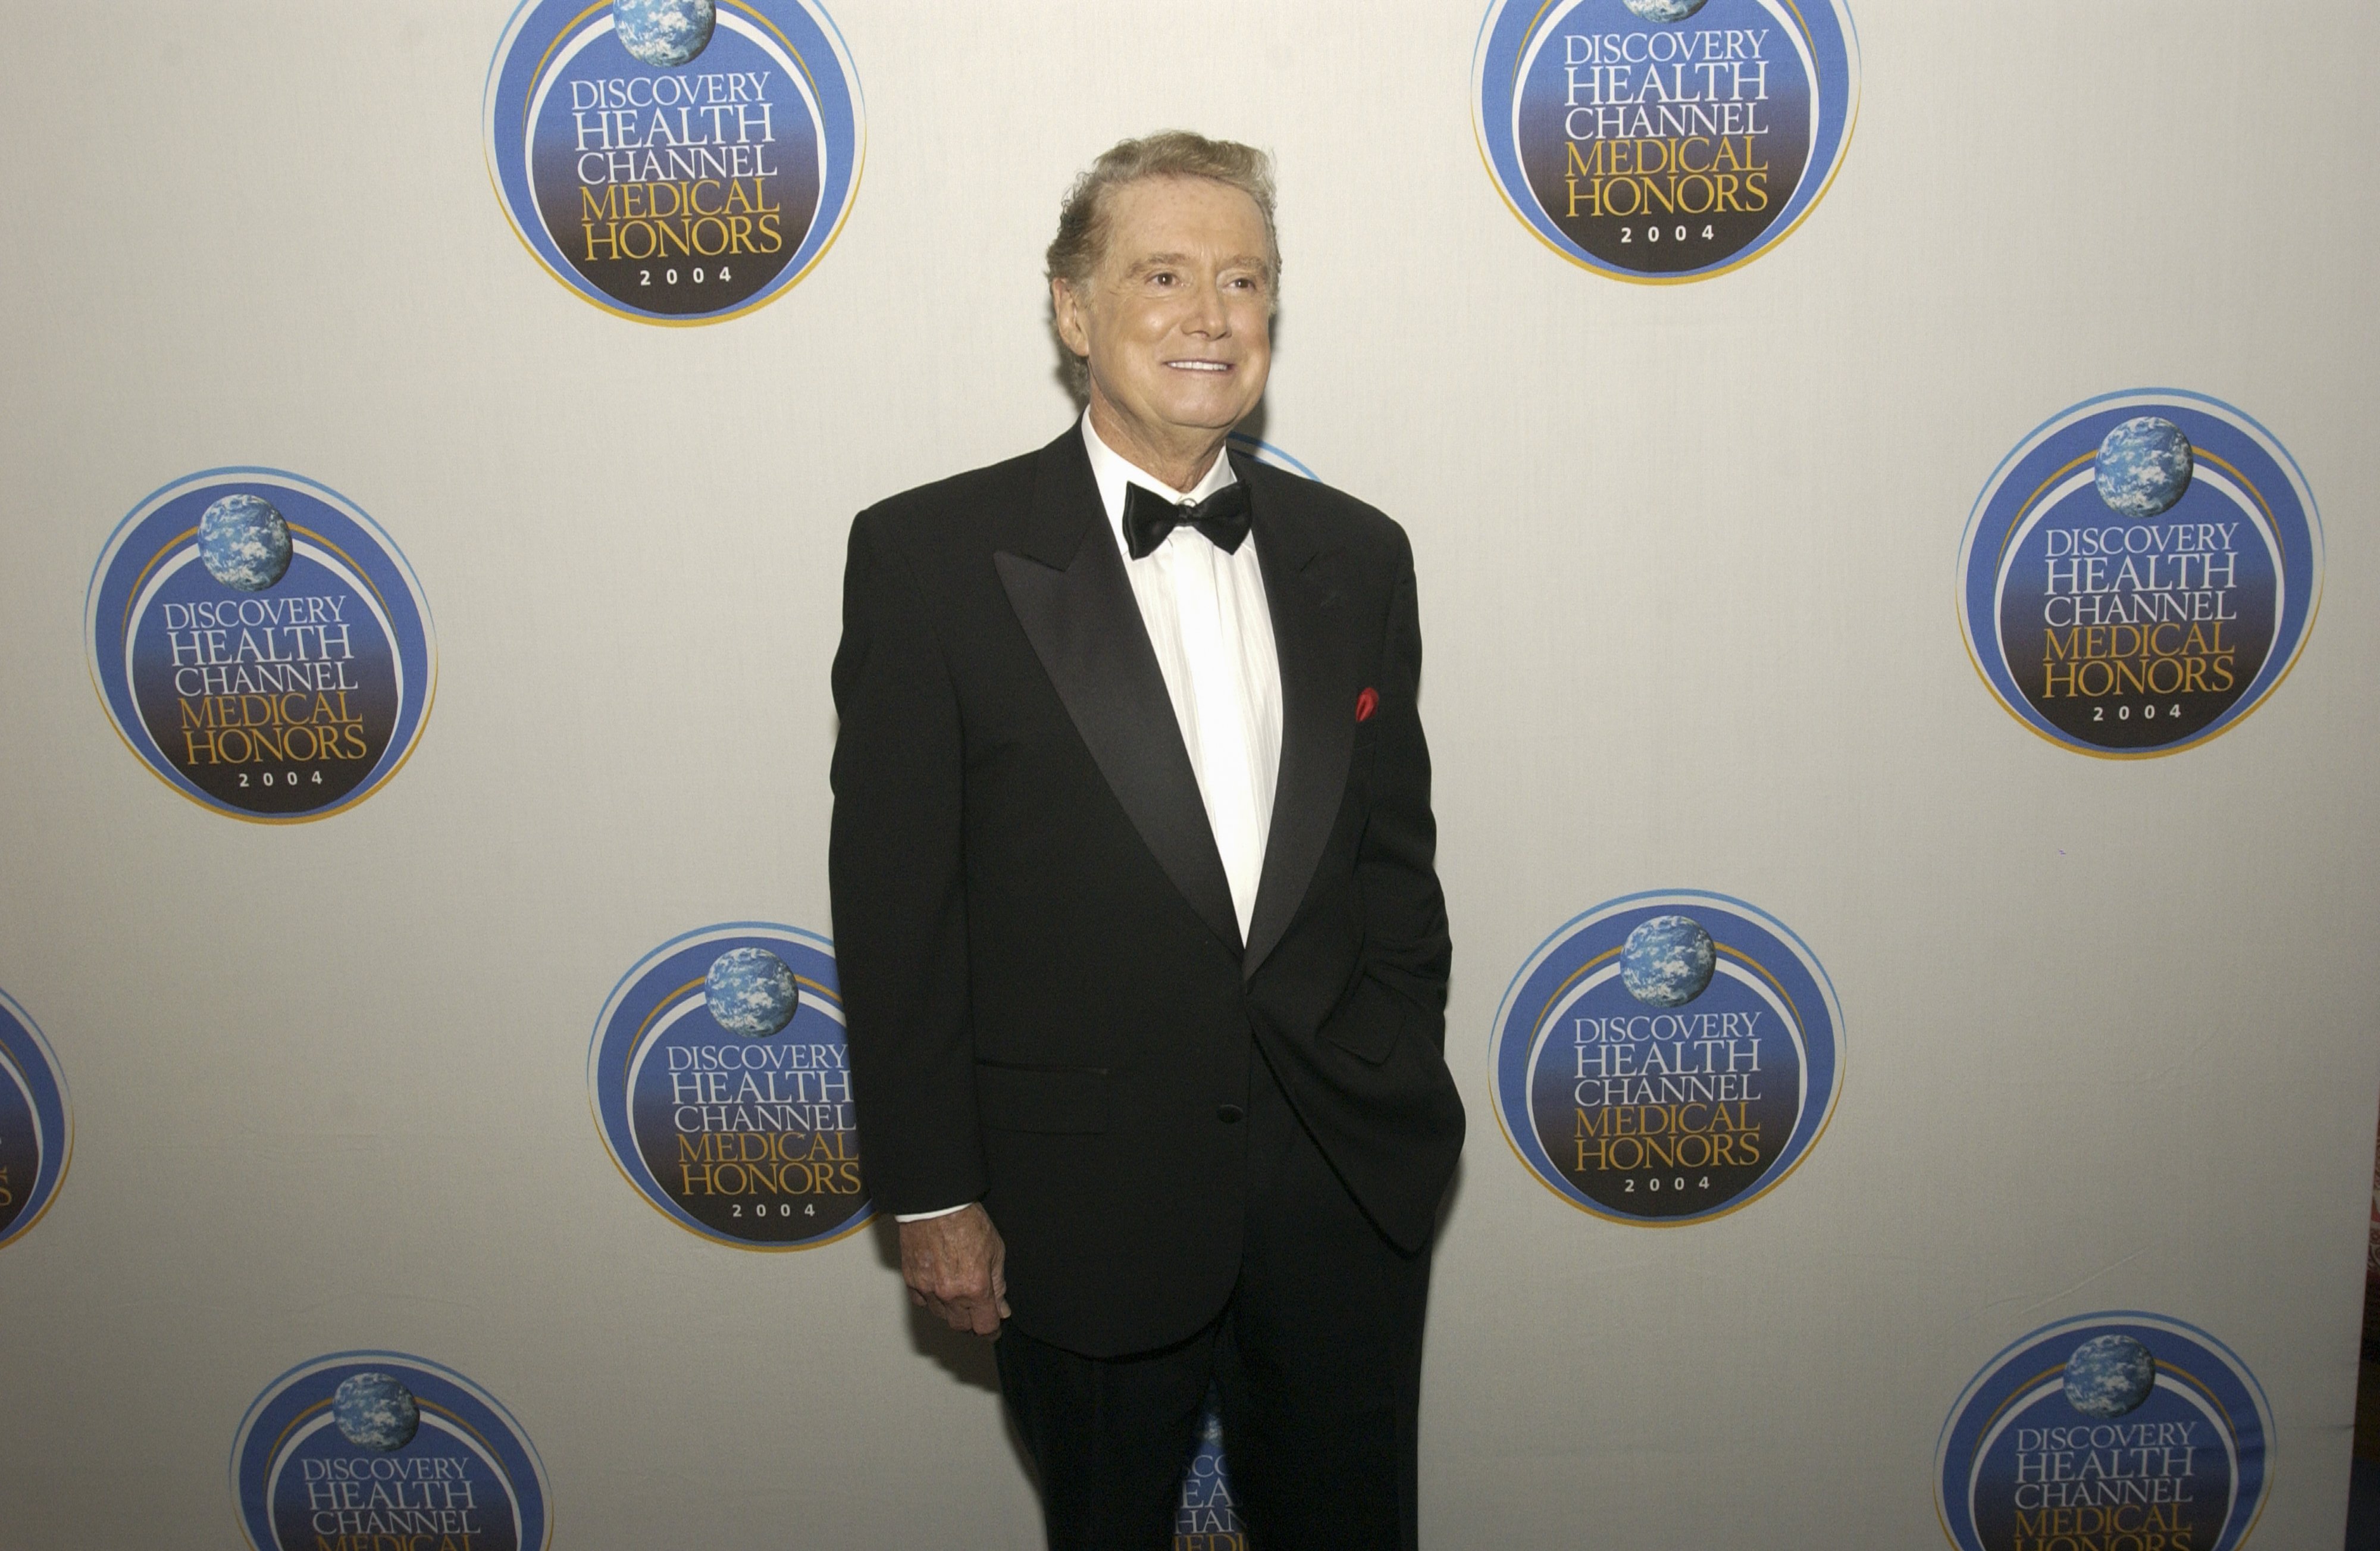 Regis Philbin at the inaugural Discovery Health Channel Medical Honors on June 23, 2004 | Source: Getty Images